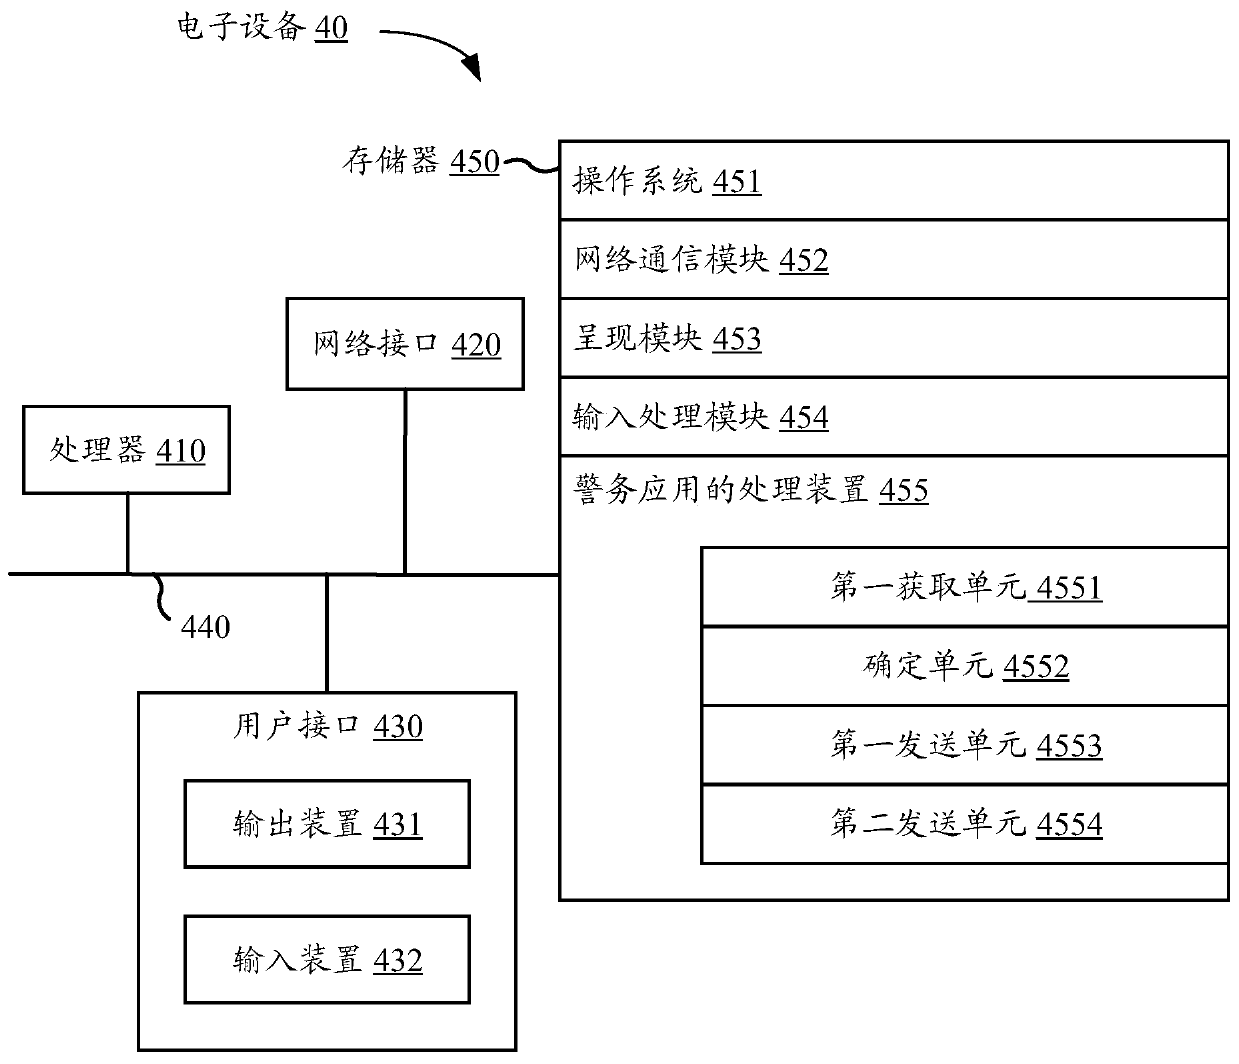 Police service application processing method and device, electronic equipment and storage medium